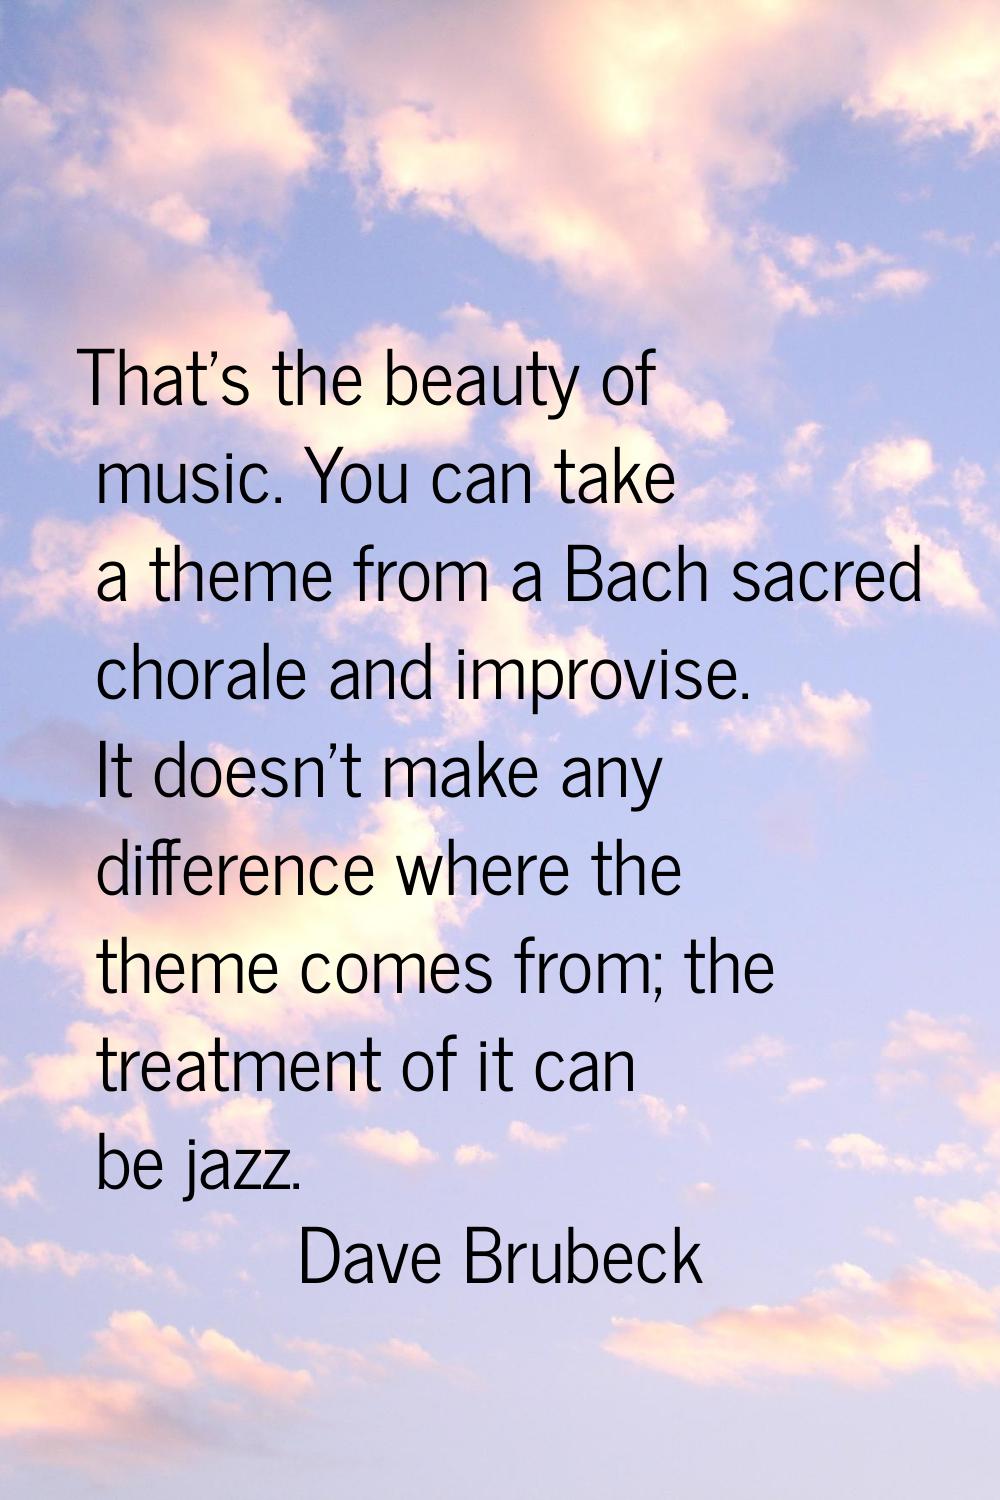 That's the beauty of music. You can take a theme from a Bach sacred chorale and improvise. It doesn